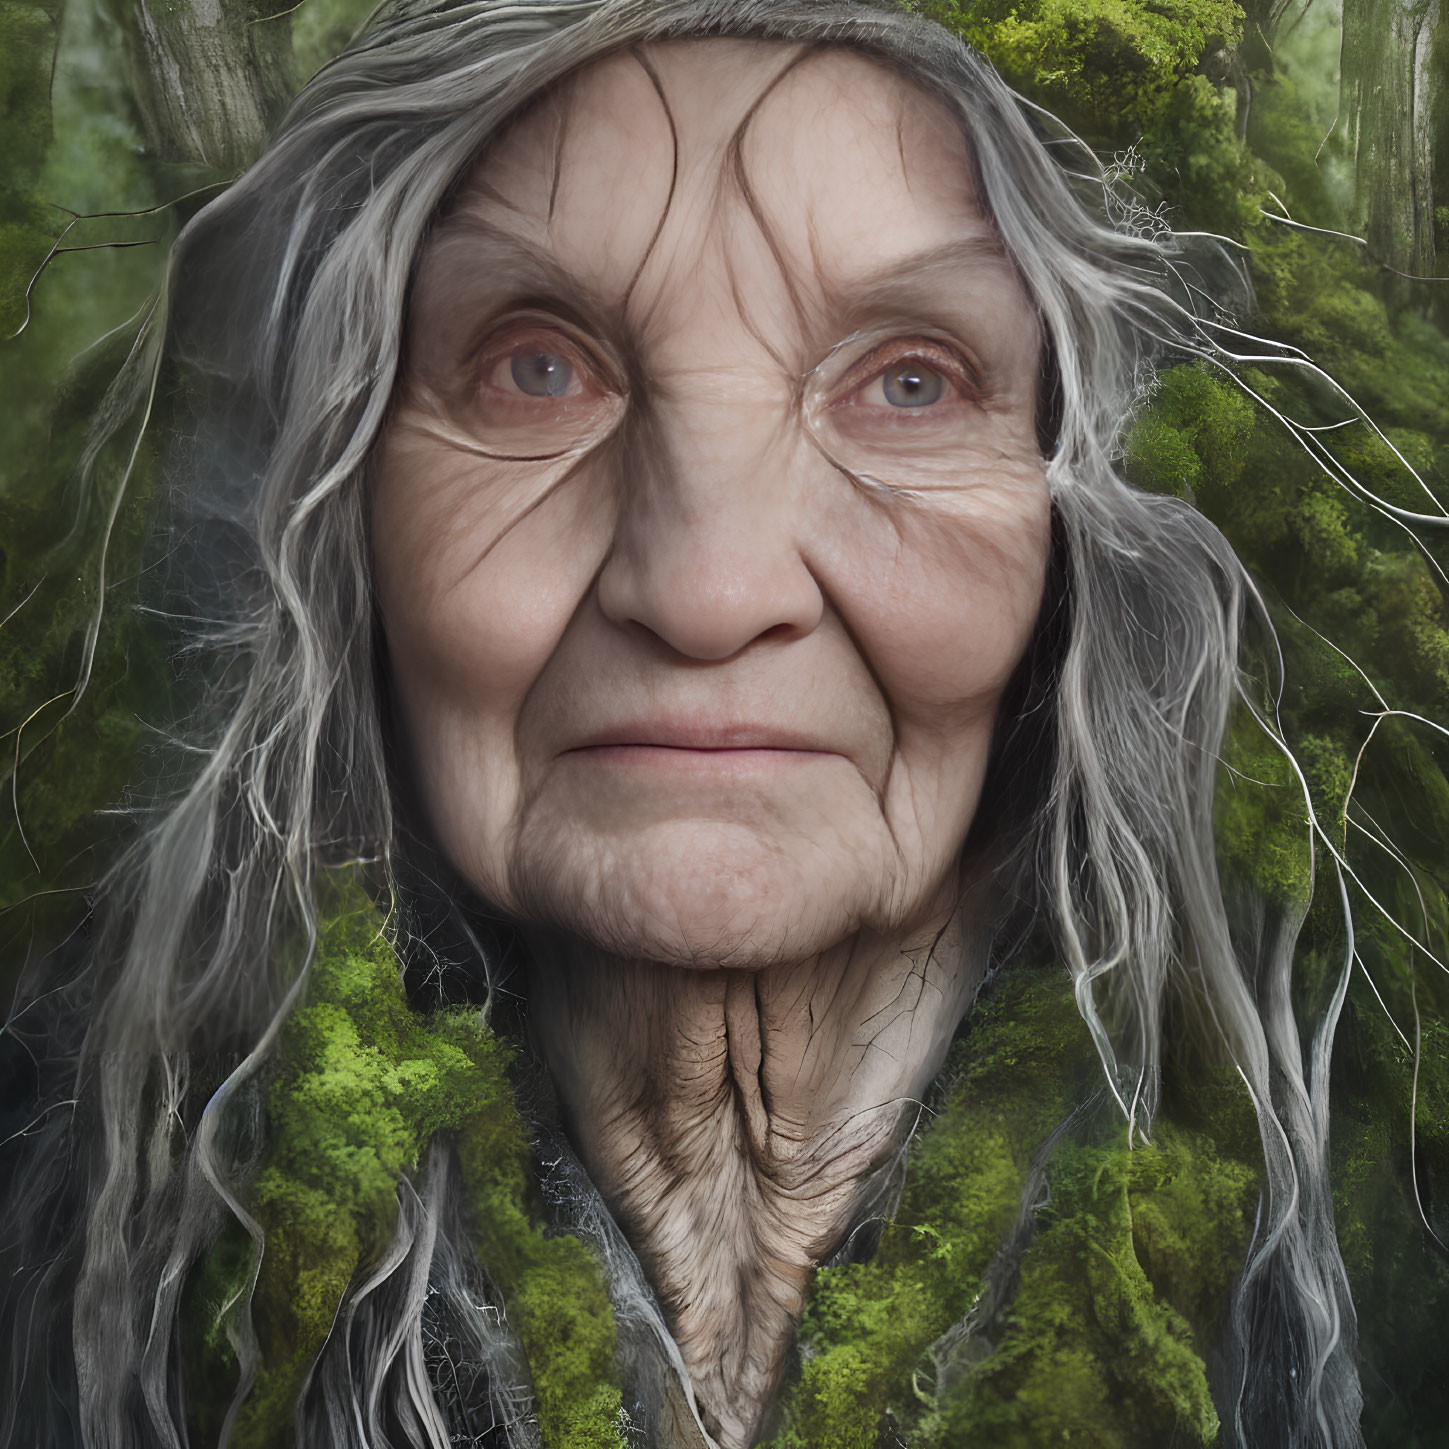 Elderly woman with deep wrinkles and gray hair in forest setting